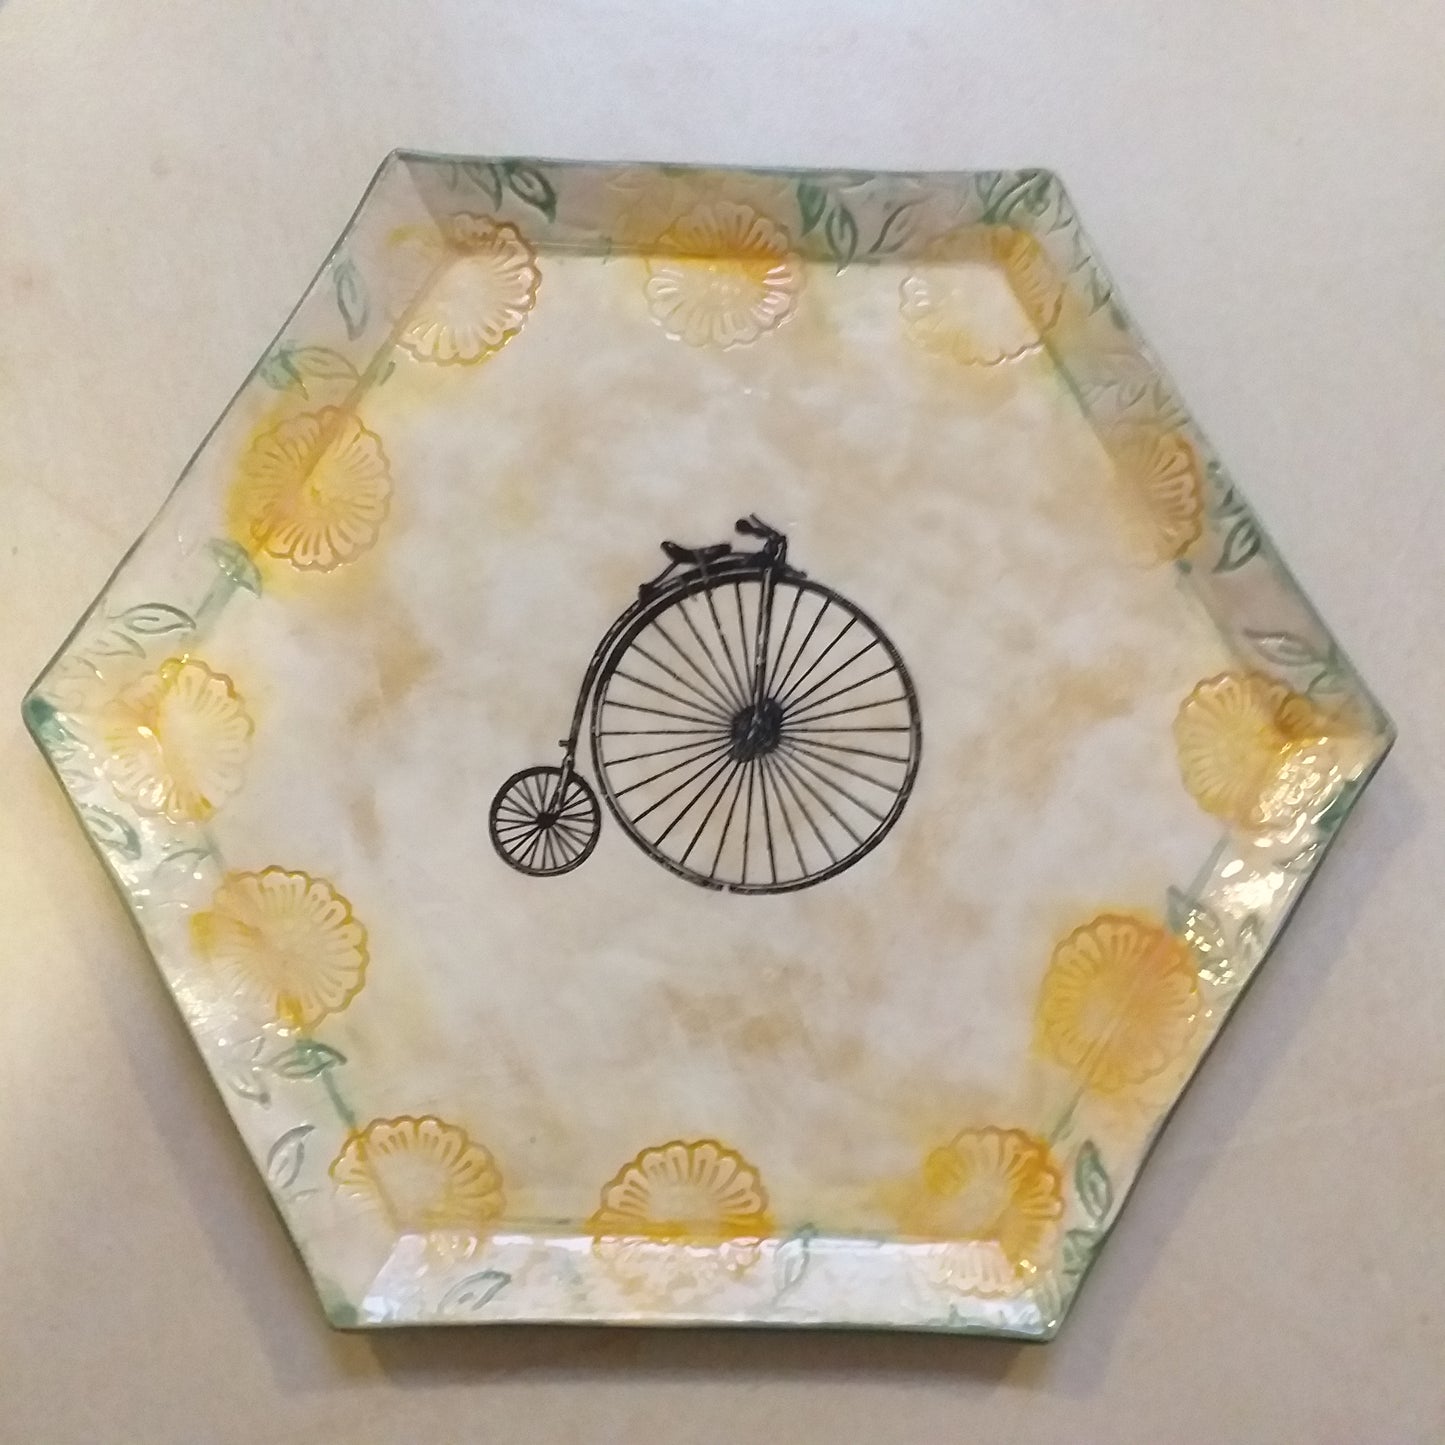 Plate ceramic 25cm, six sided snack or dinner plate.